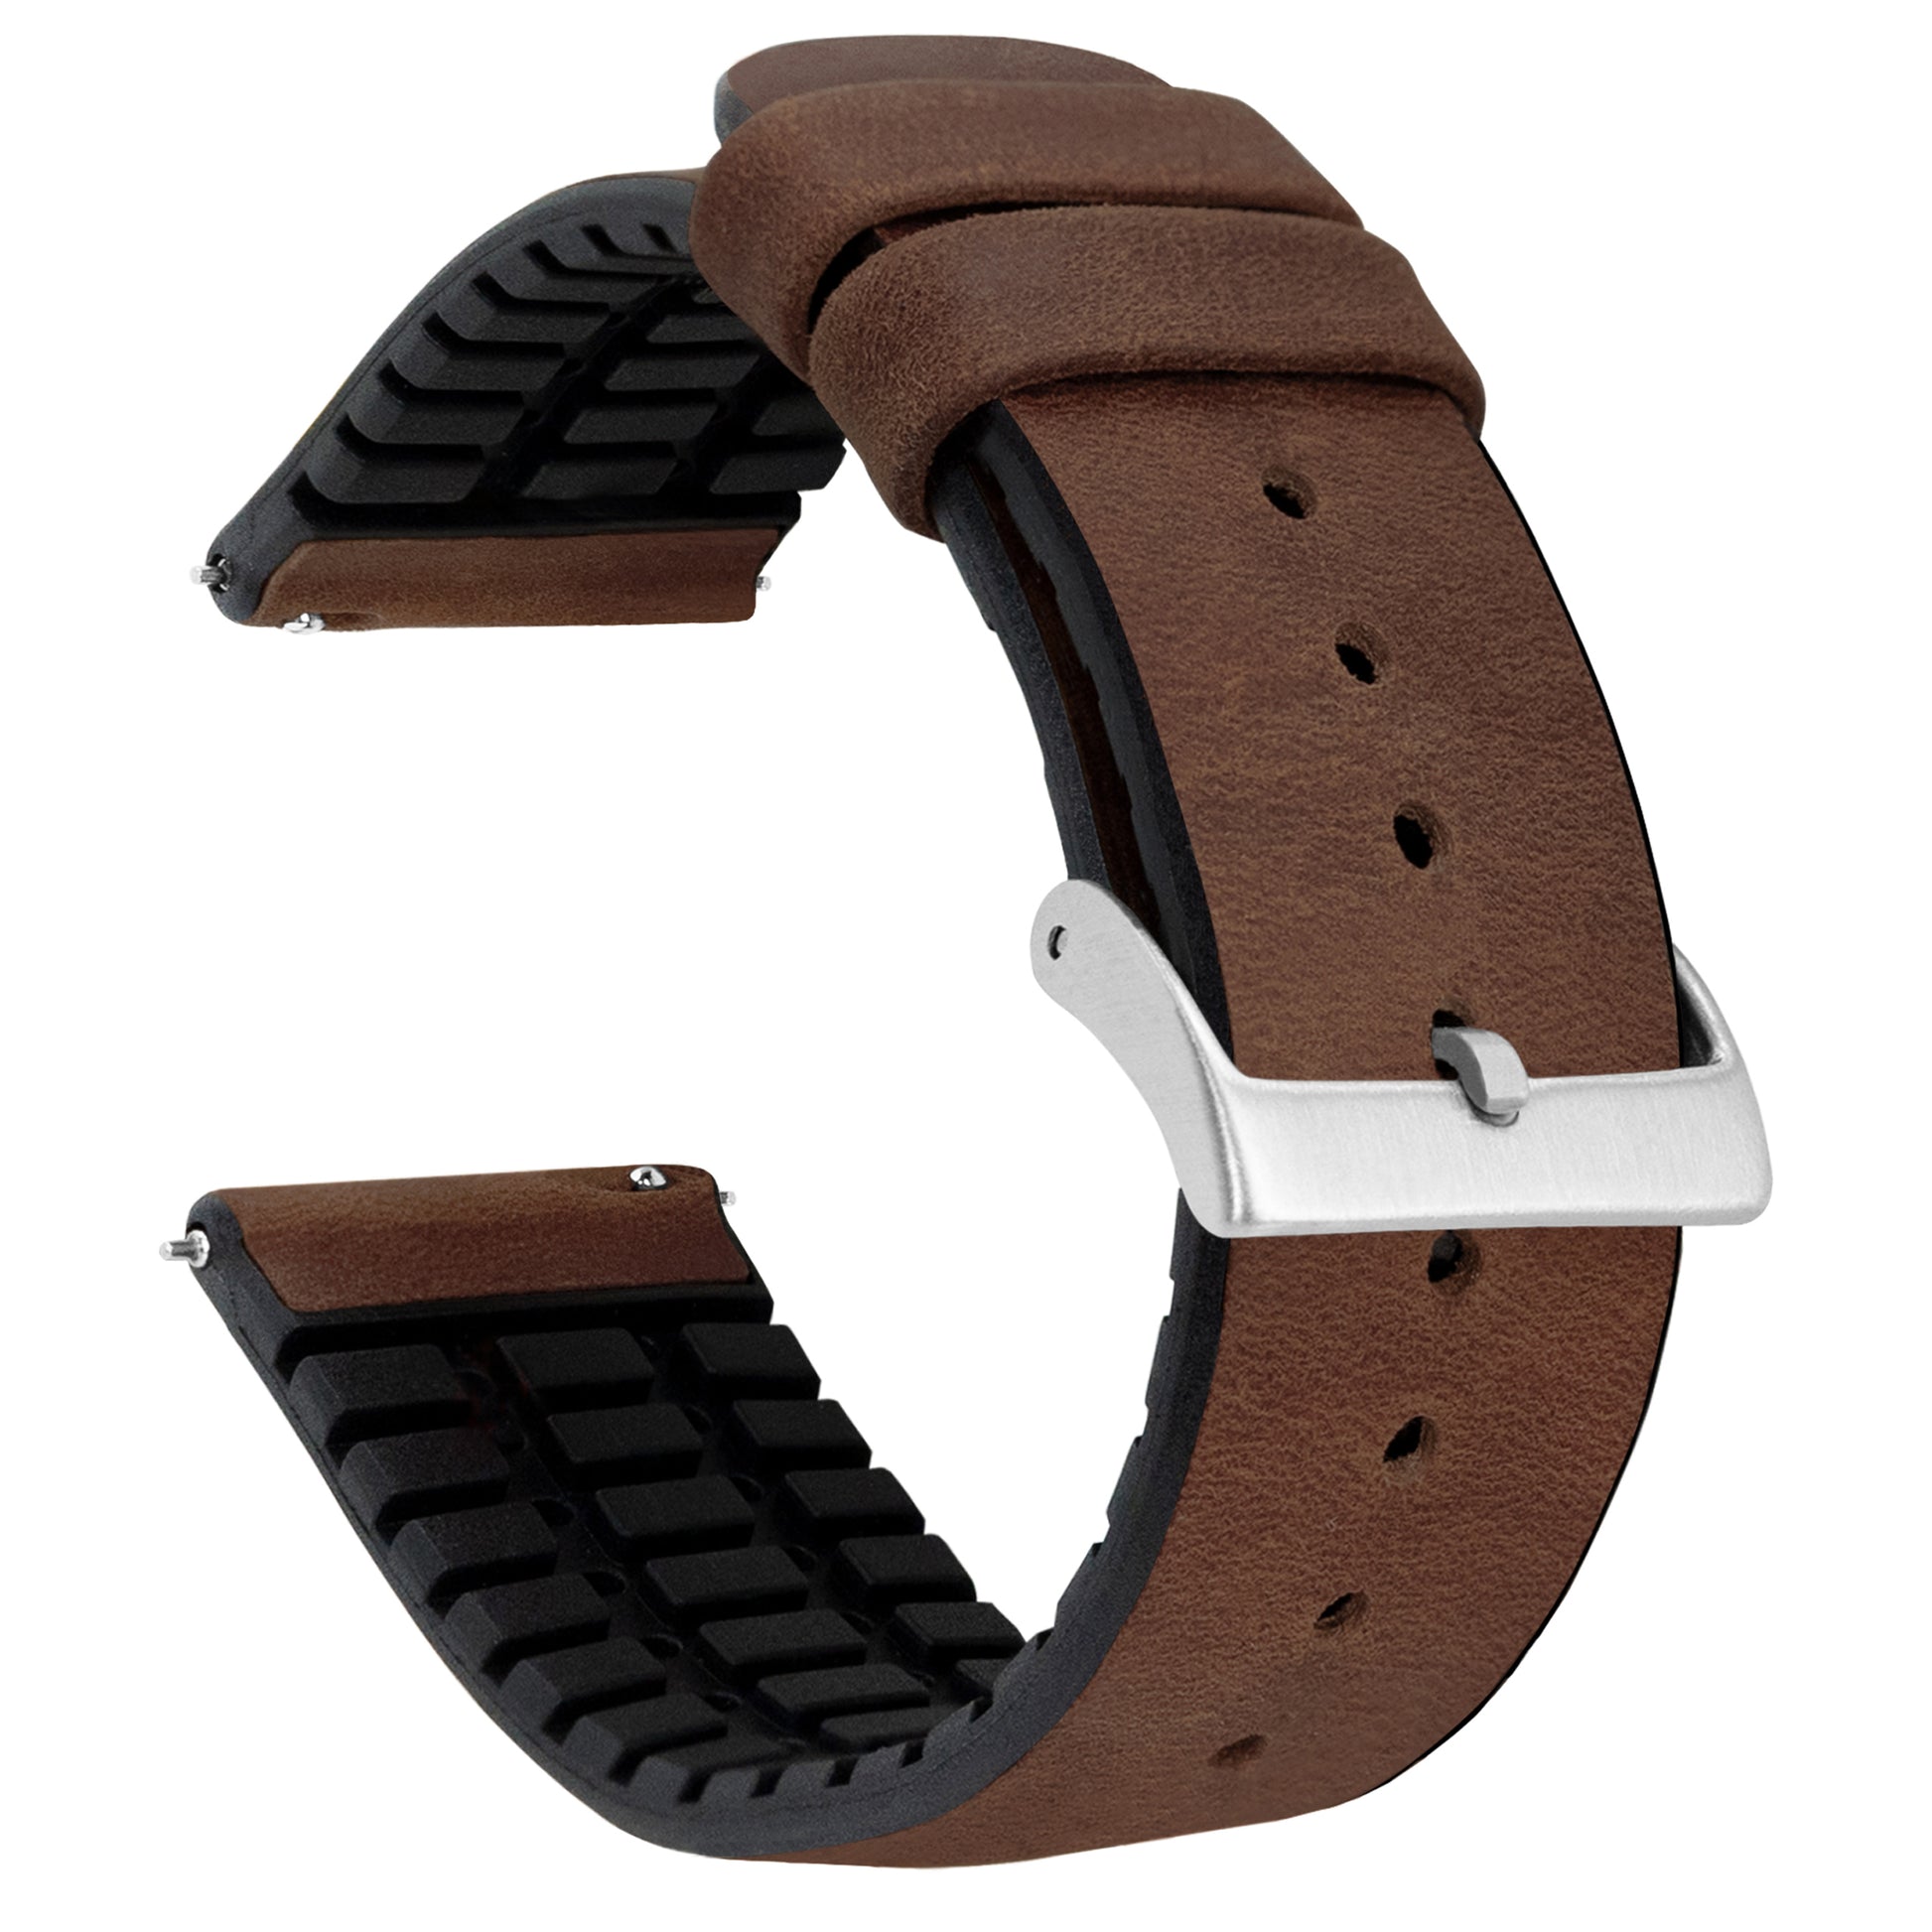 Walnut Brown Leather and Rubber Hybrid - Barton Watch Bands